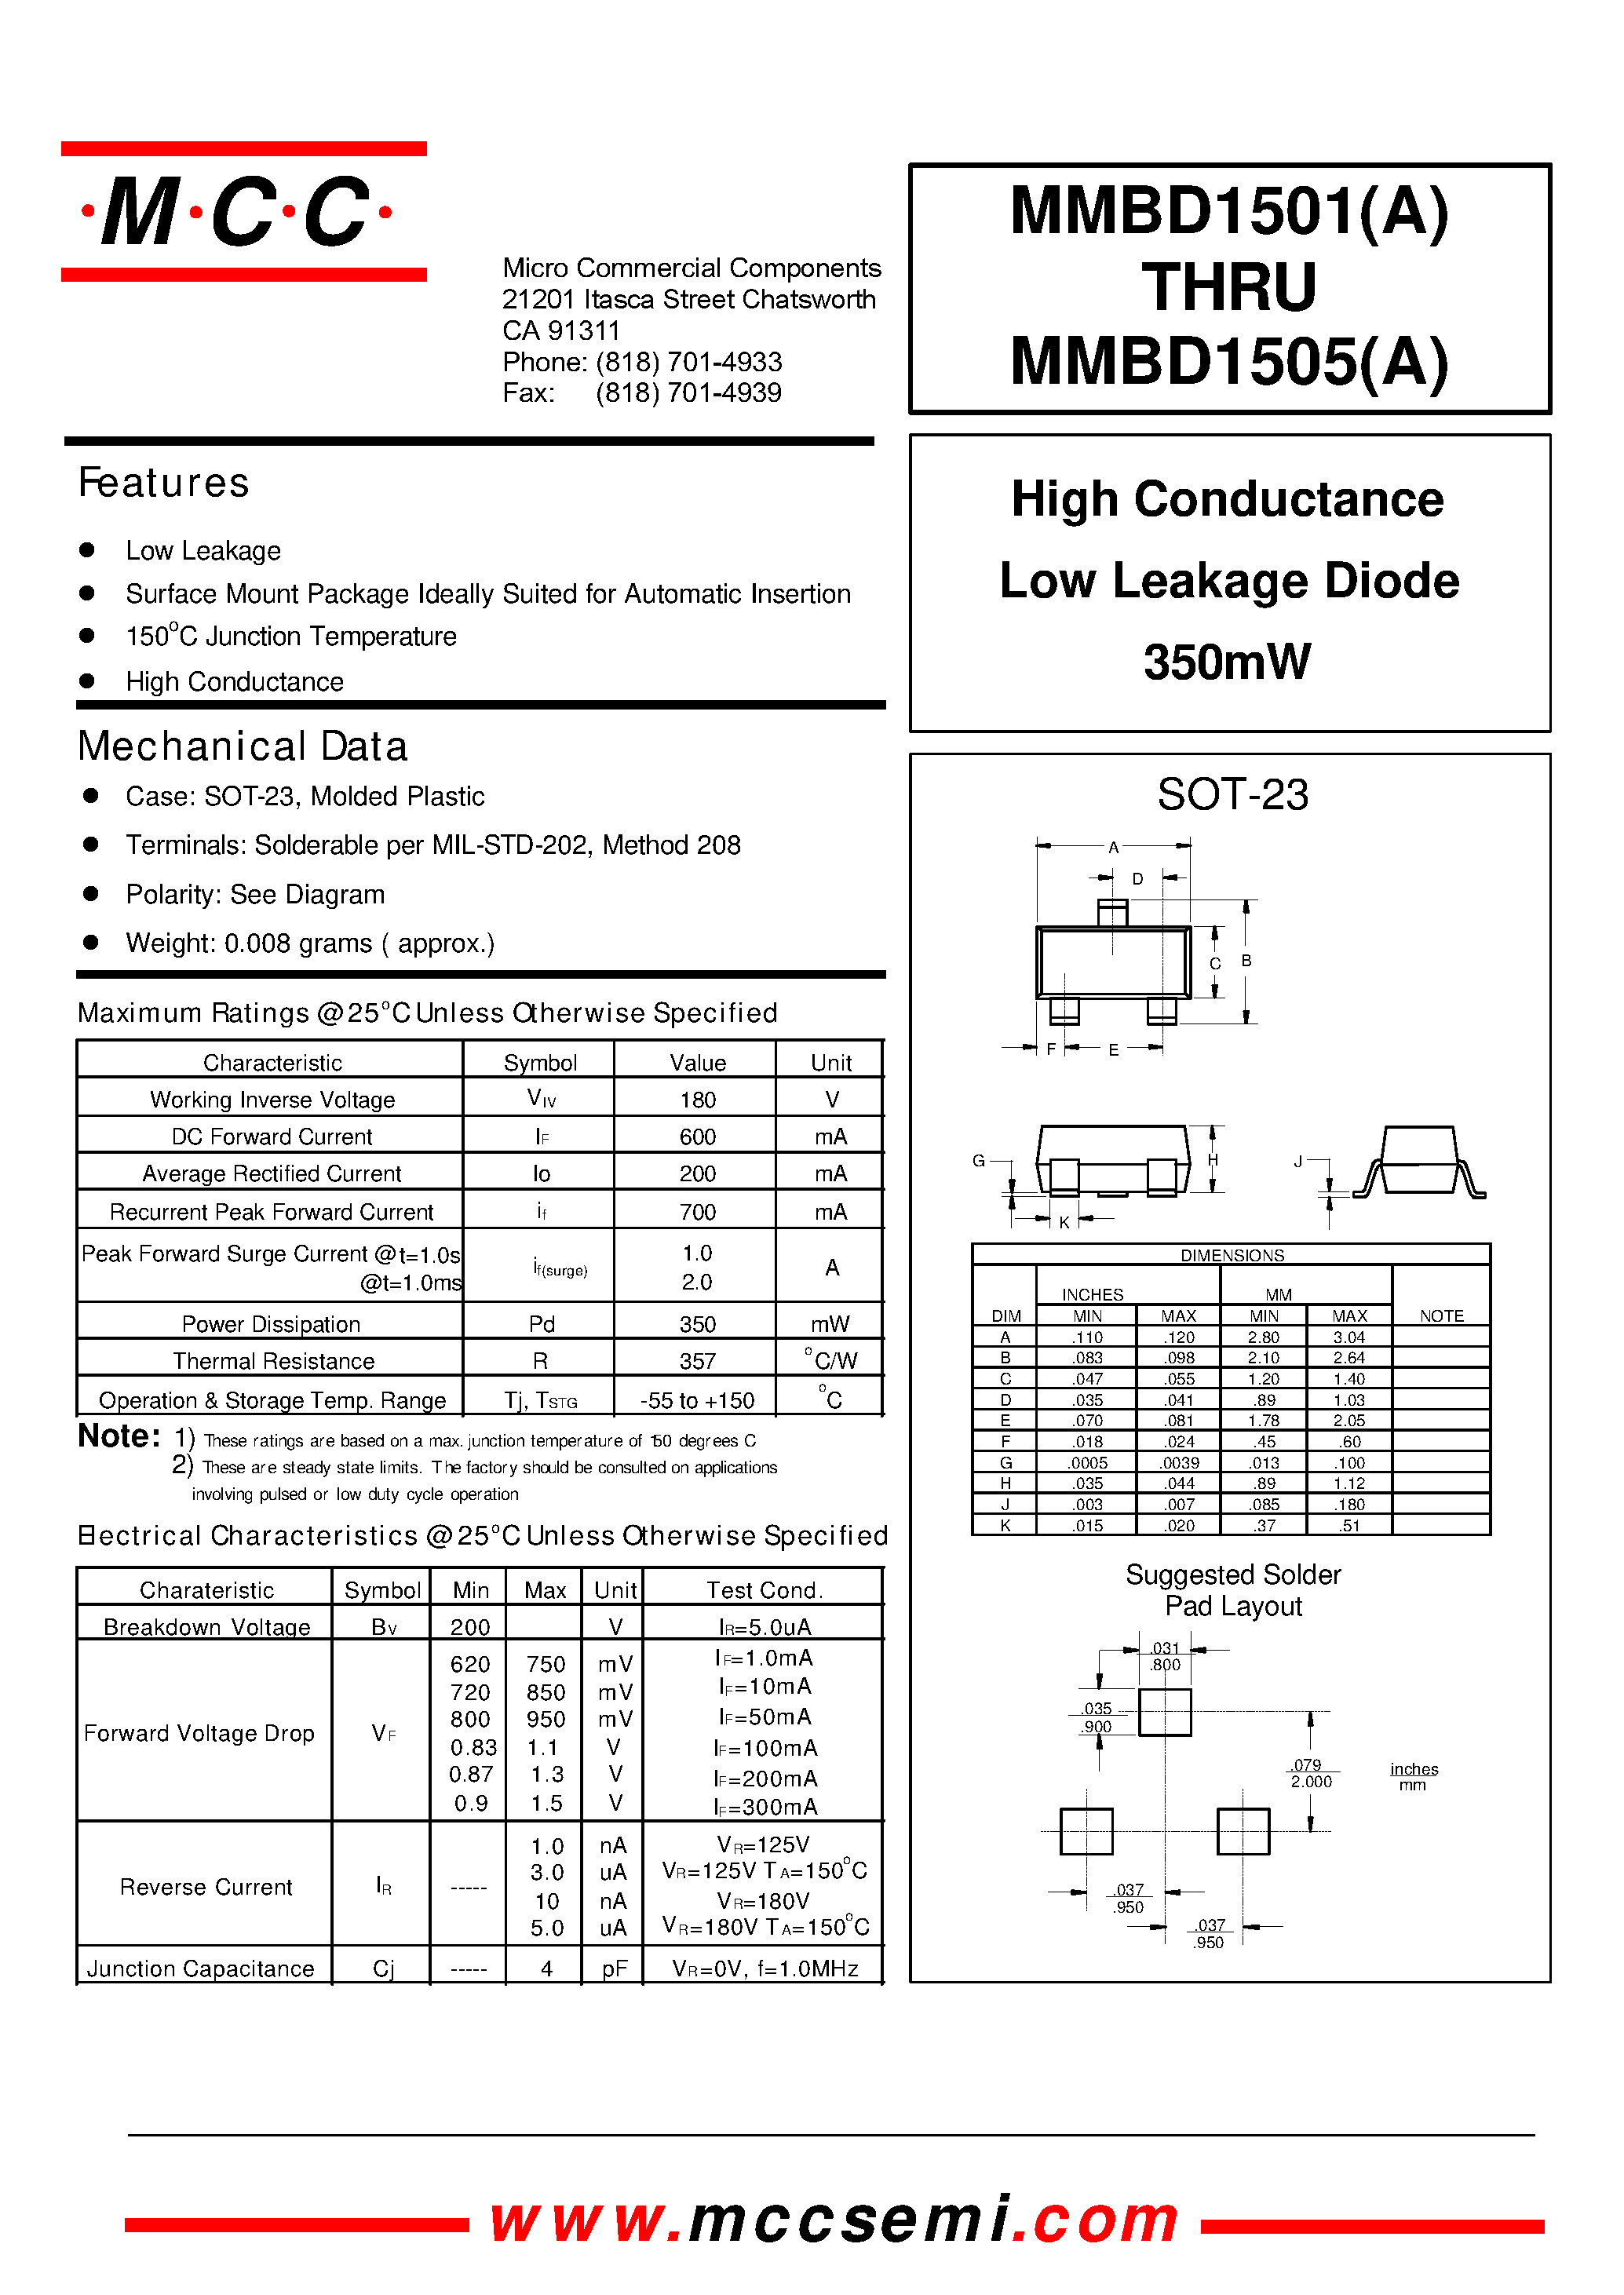 Даташит MMBD1501 - High Conductance Low Leakage Diode 350mW страница 1